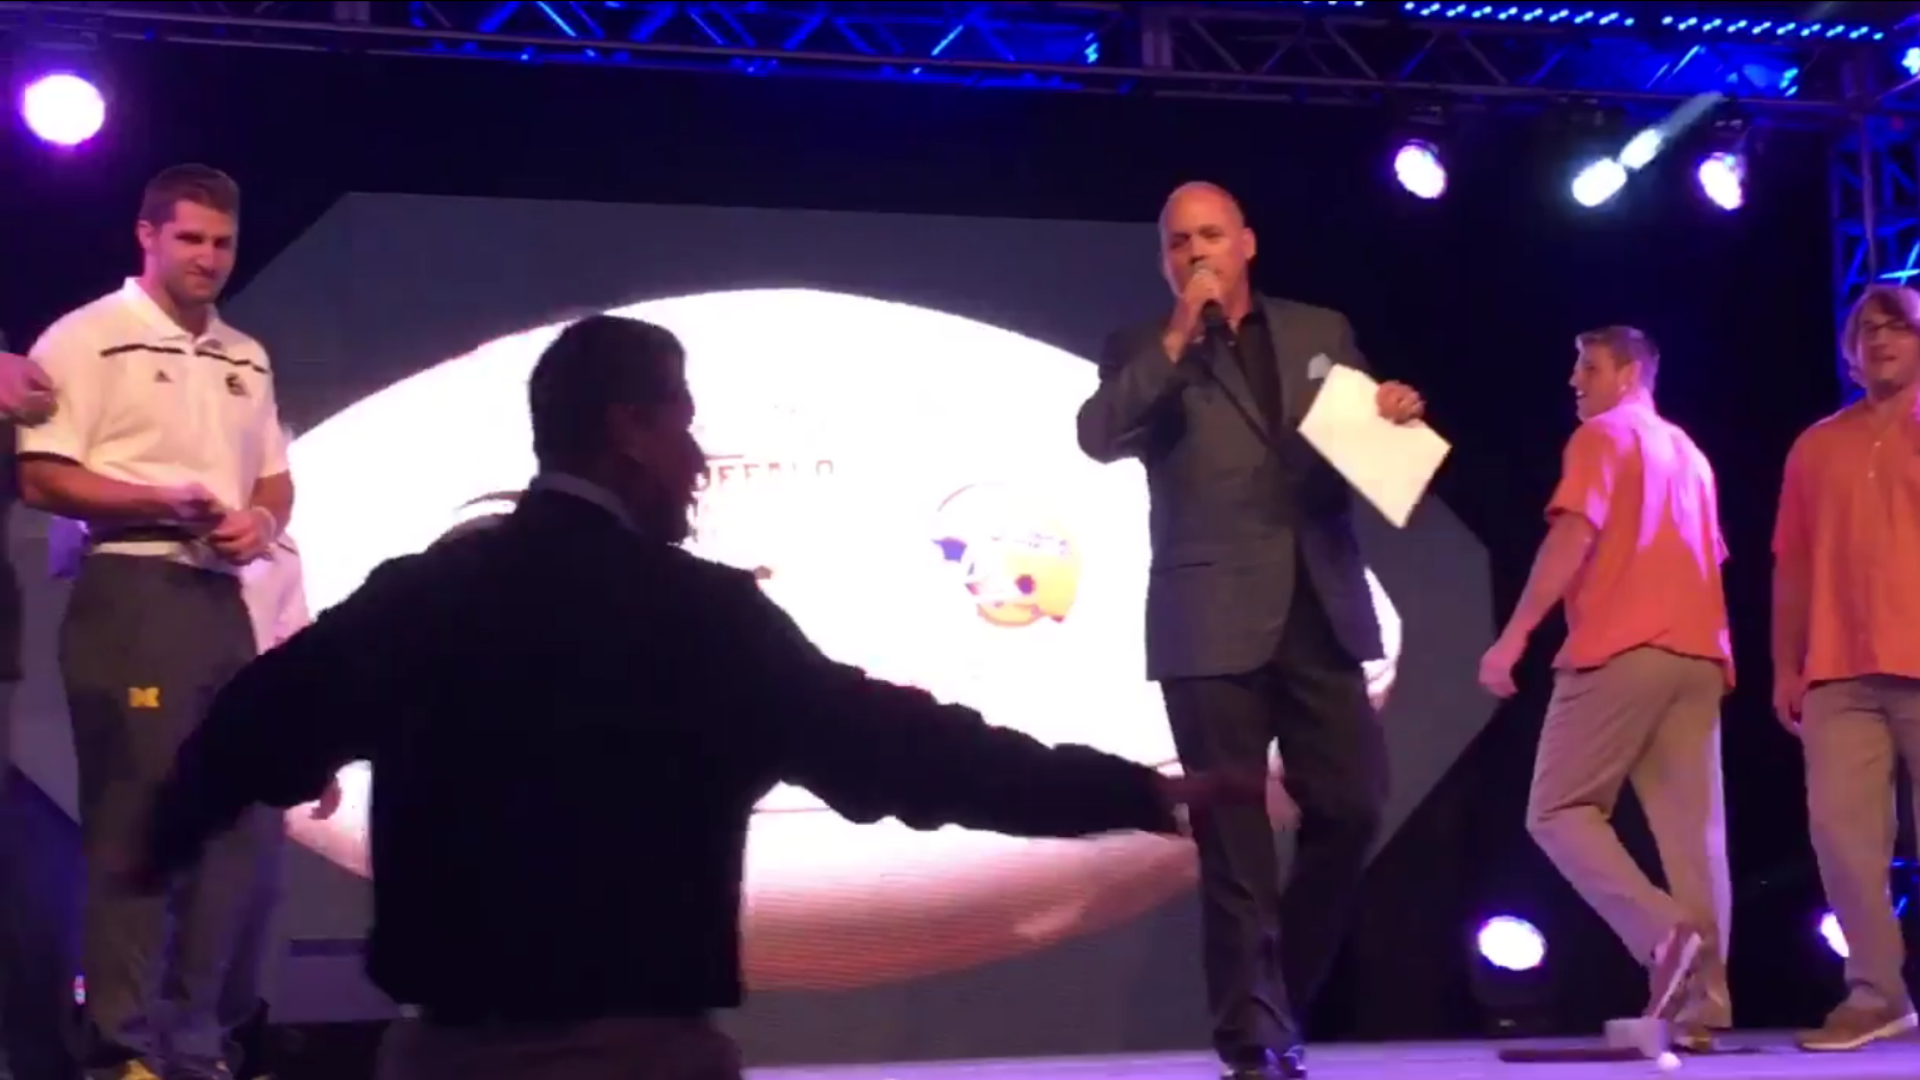 Jim Harbaugh storms stage after controversial ping-pong ball shaking competition